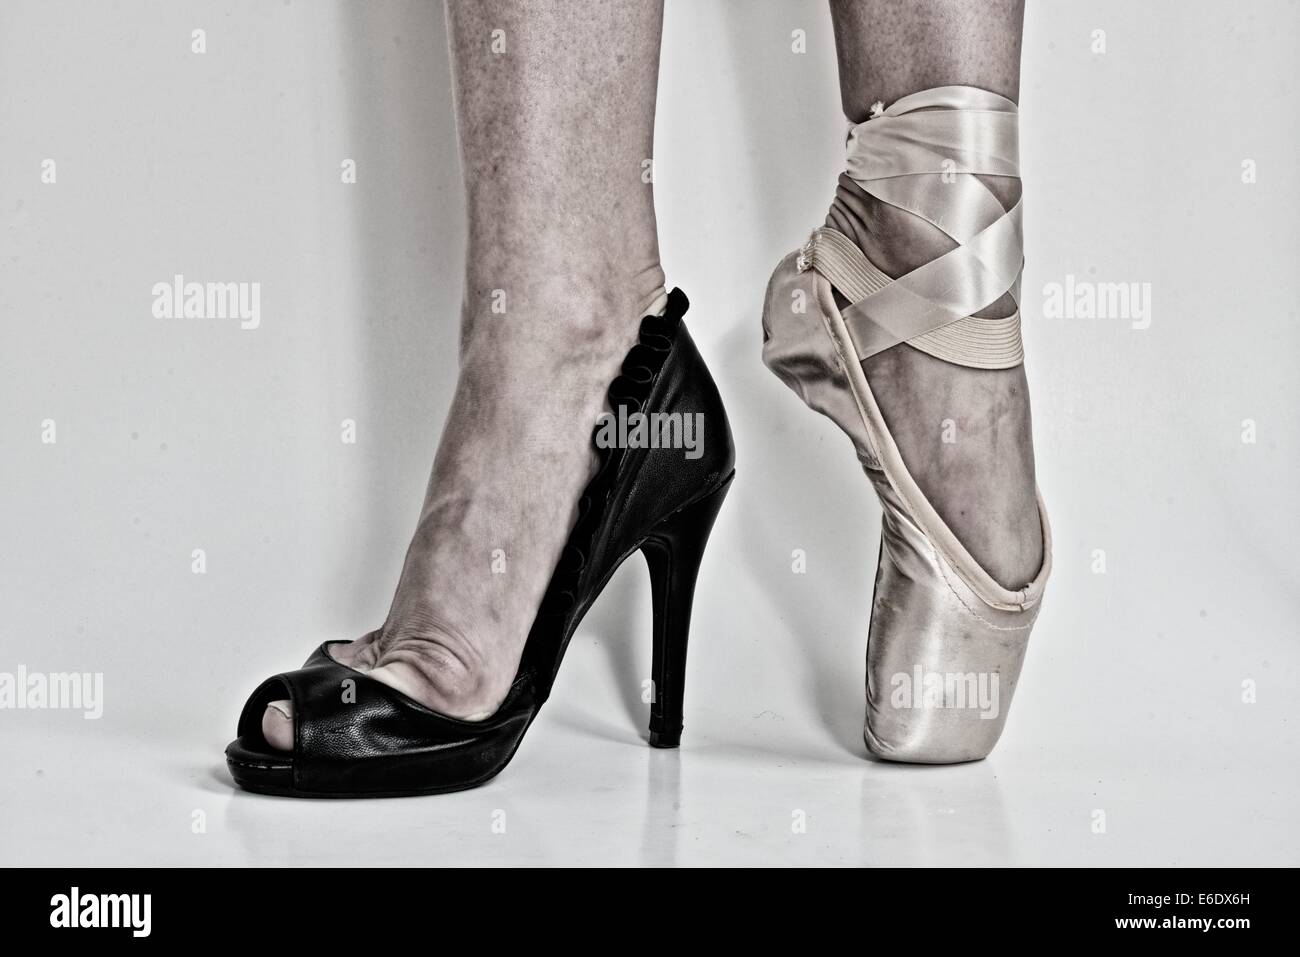 Legs of a ballerina with a black high heel shoe in one feet and a pointe ballet shoe in the other. Stock Photo